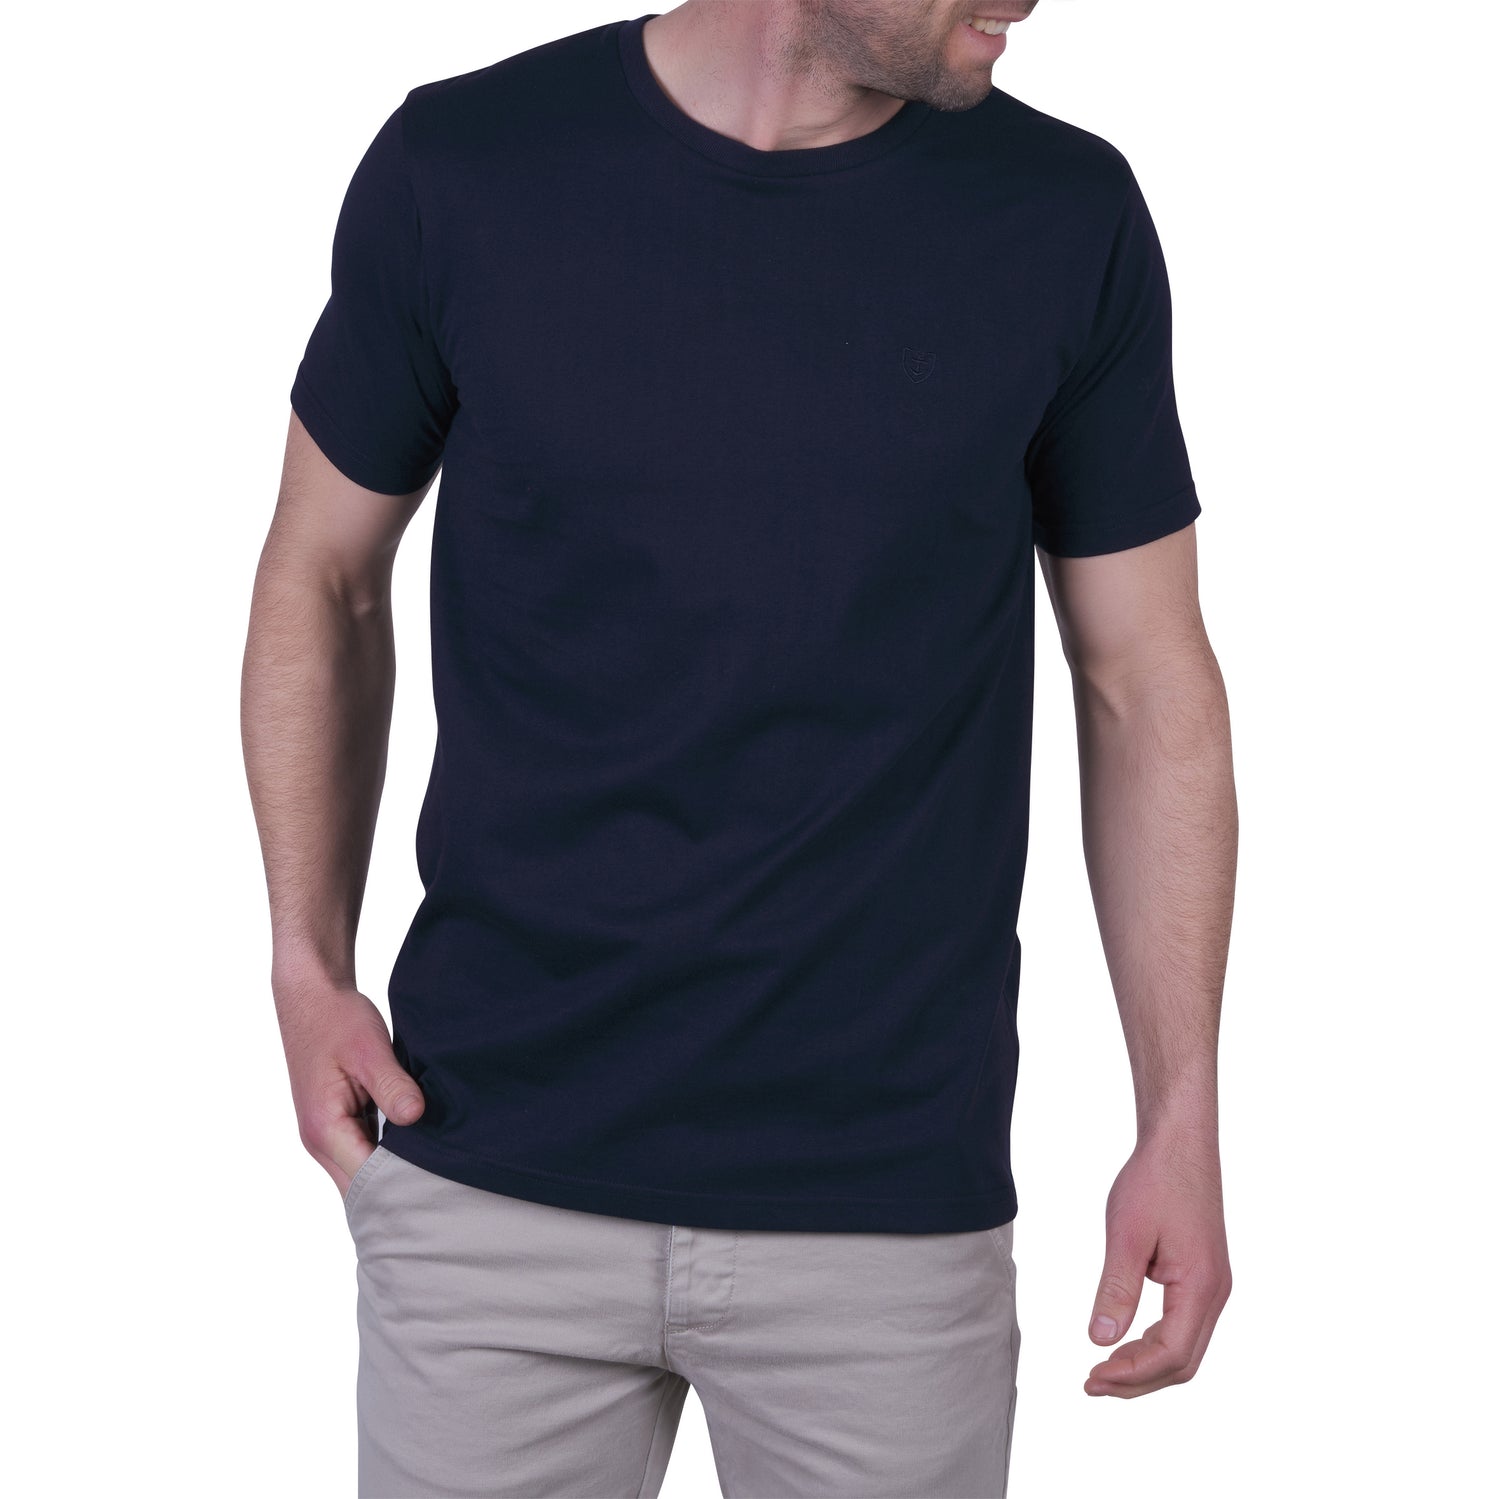 T-shirt in Pure Combed Cotton Jersey NAVY BLUE